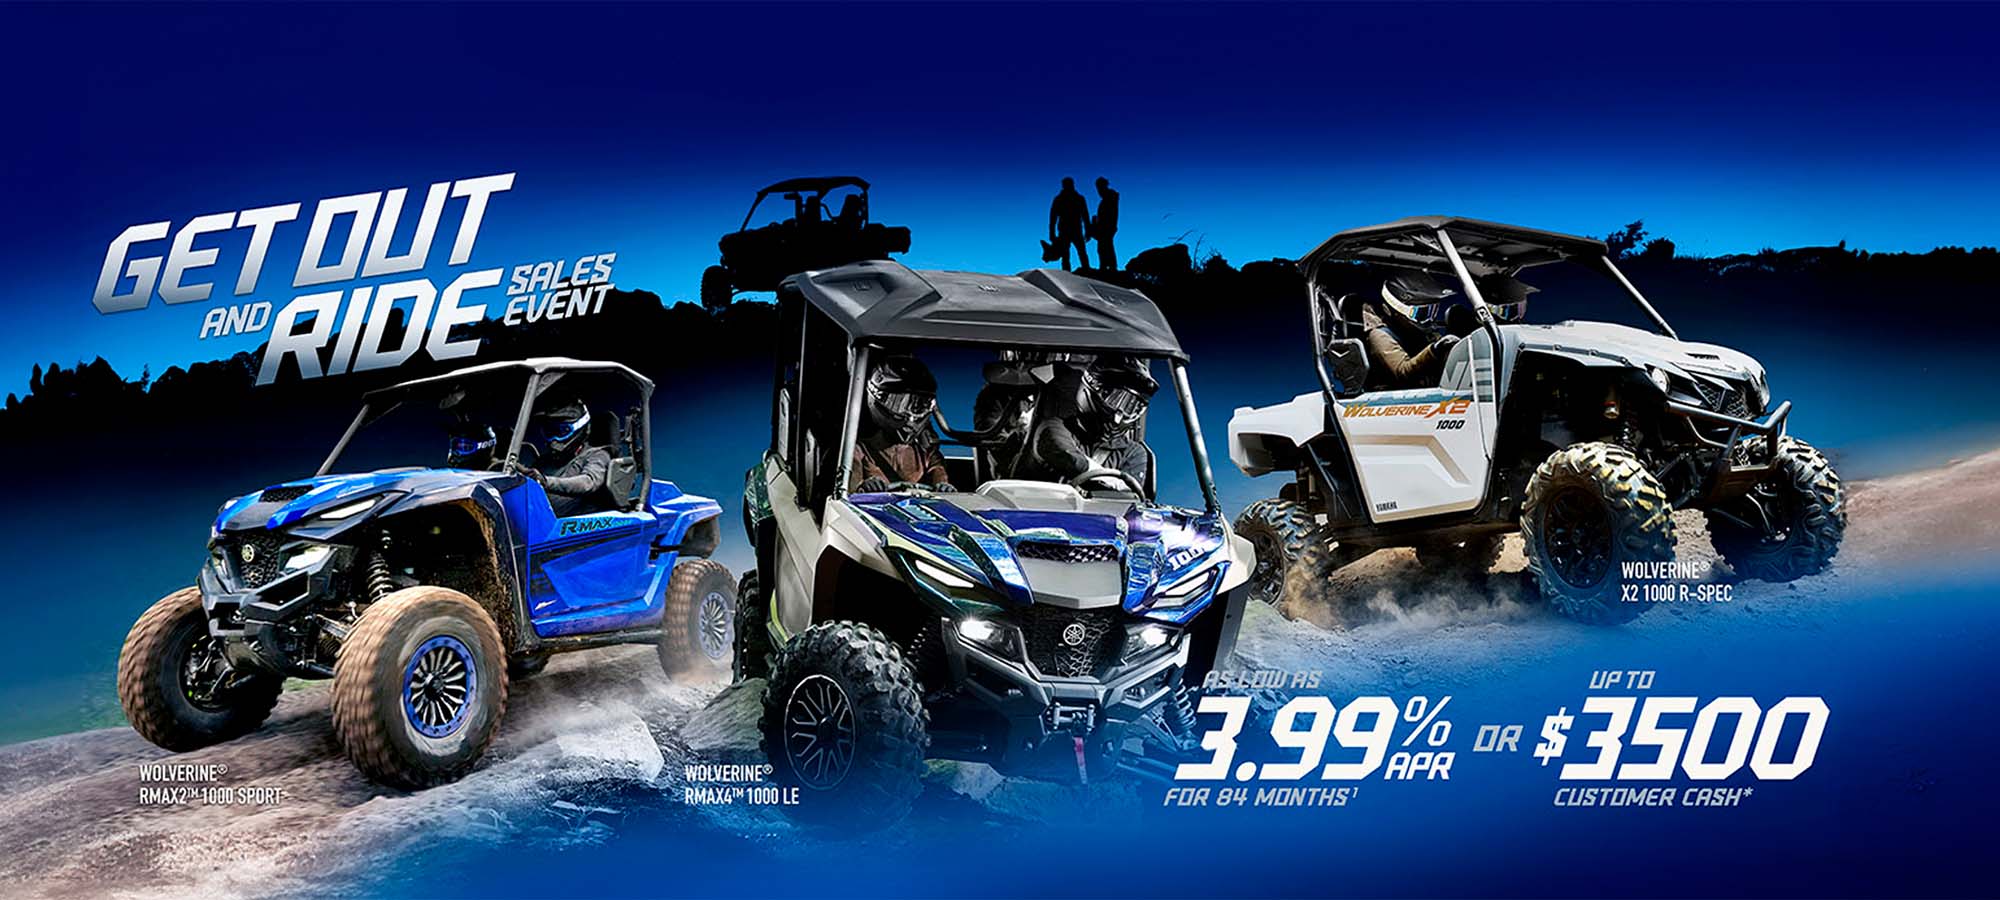 Yamaha US - GET OUT AND RIDE UTV SXS at Friendly Powersports Slidell